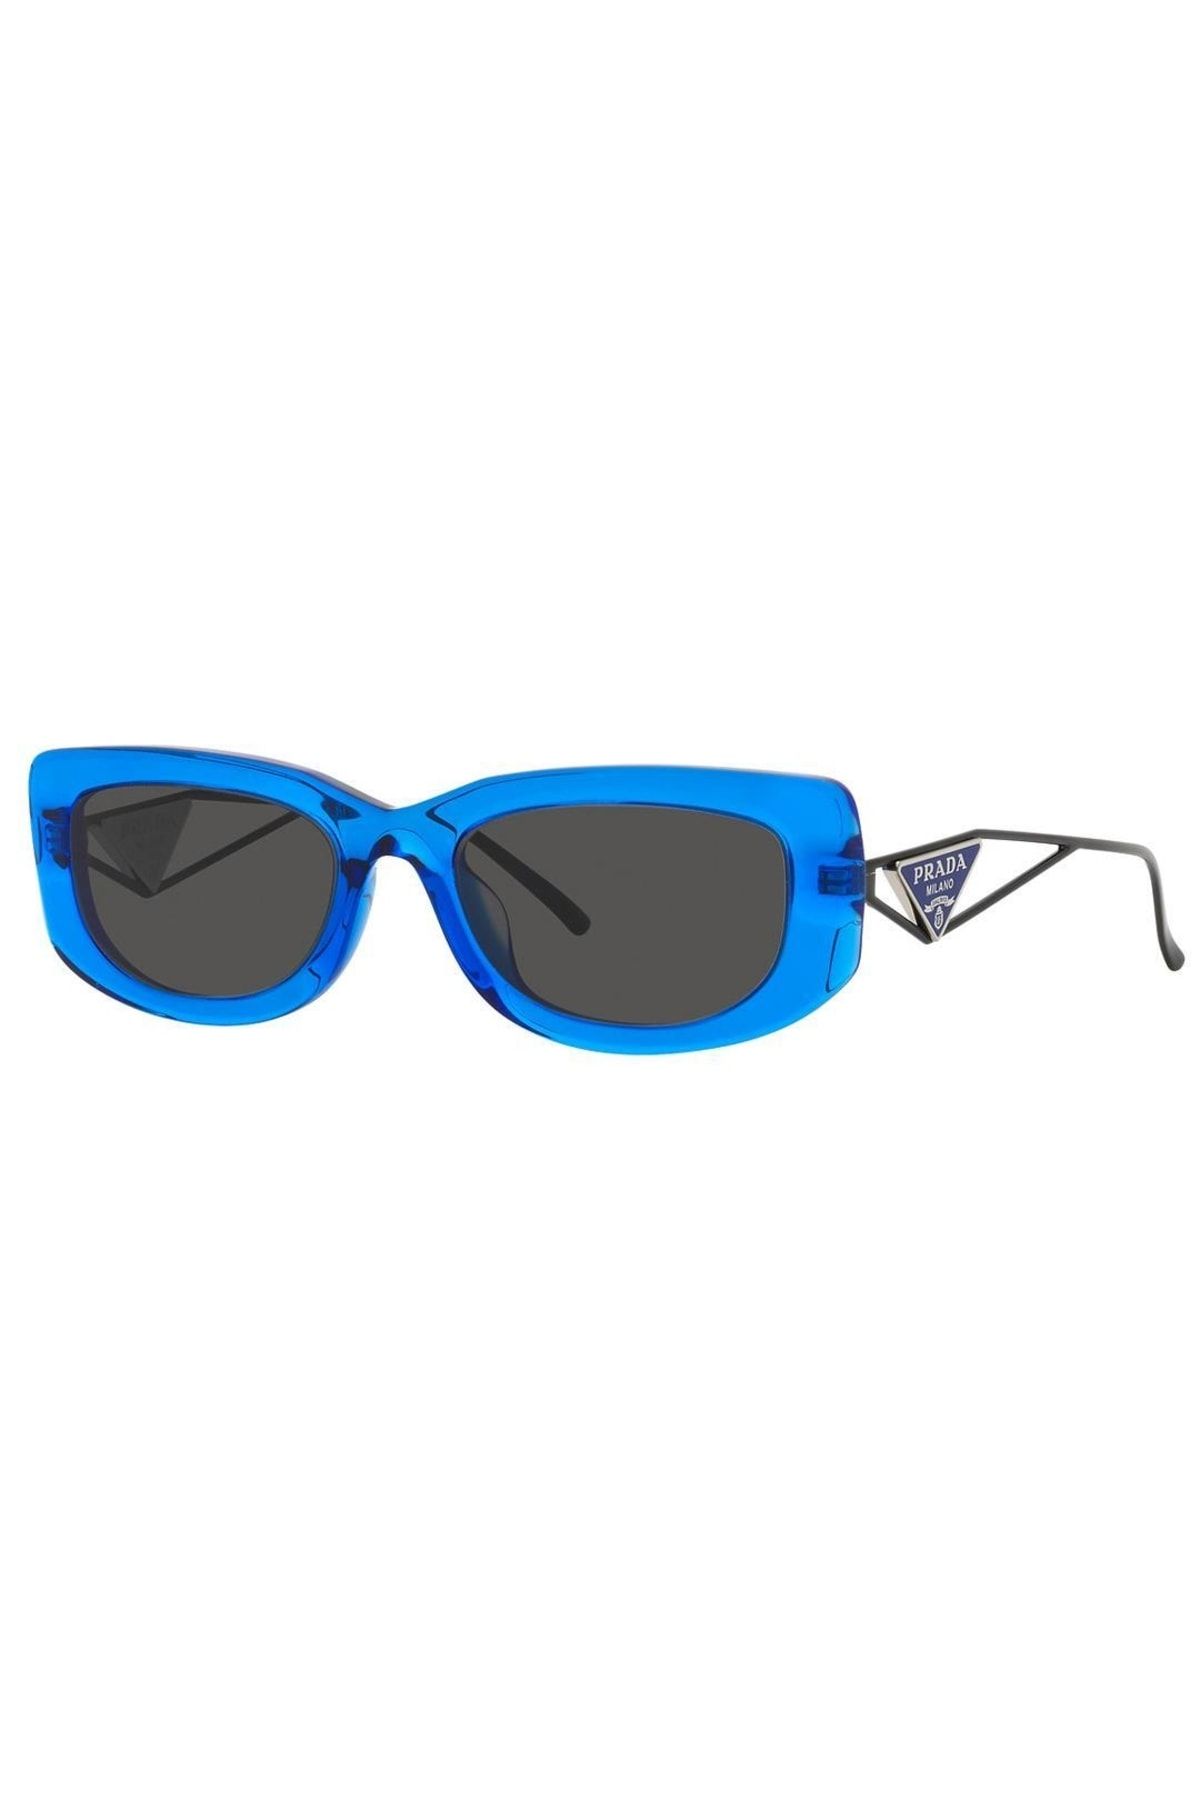 PRADA Gradient-Lens Side-Logo Unisex Square Shape Sunglasses - Blue and  Brown: Buy Online at Best Price in Egypt - Souq is now Amazon.eg